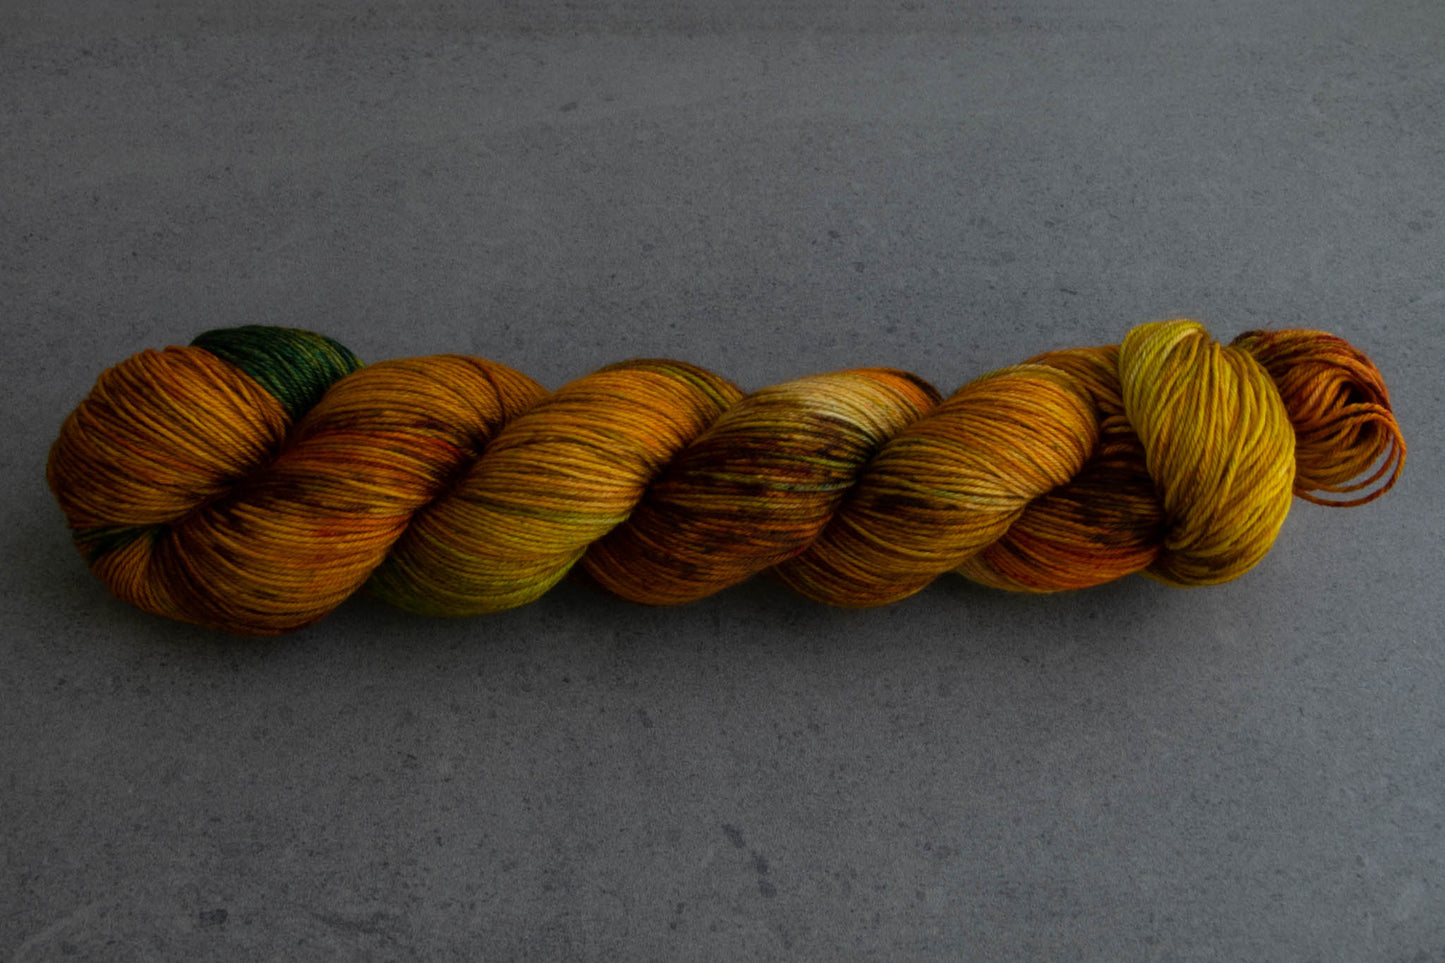 A skein of warm brown, yellow, orange, and green hand-dyed wool yarn.